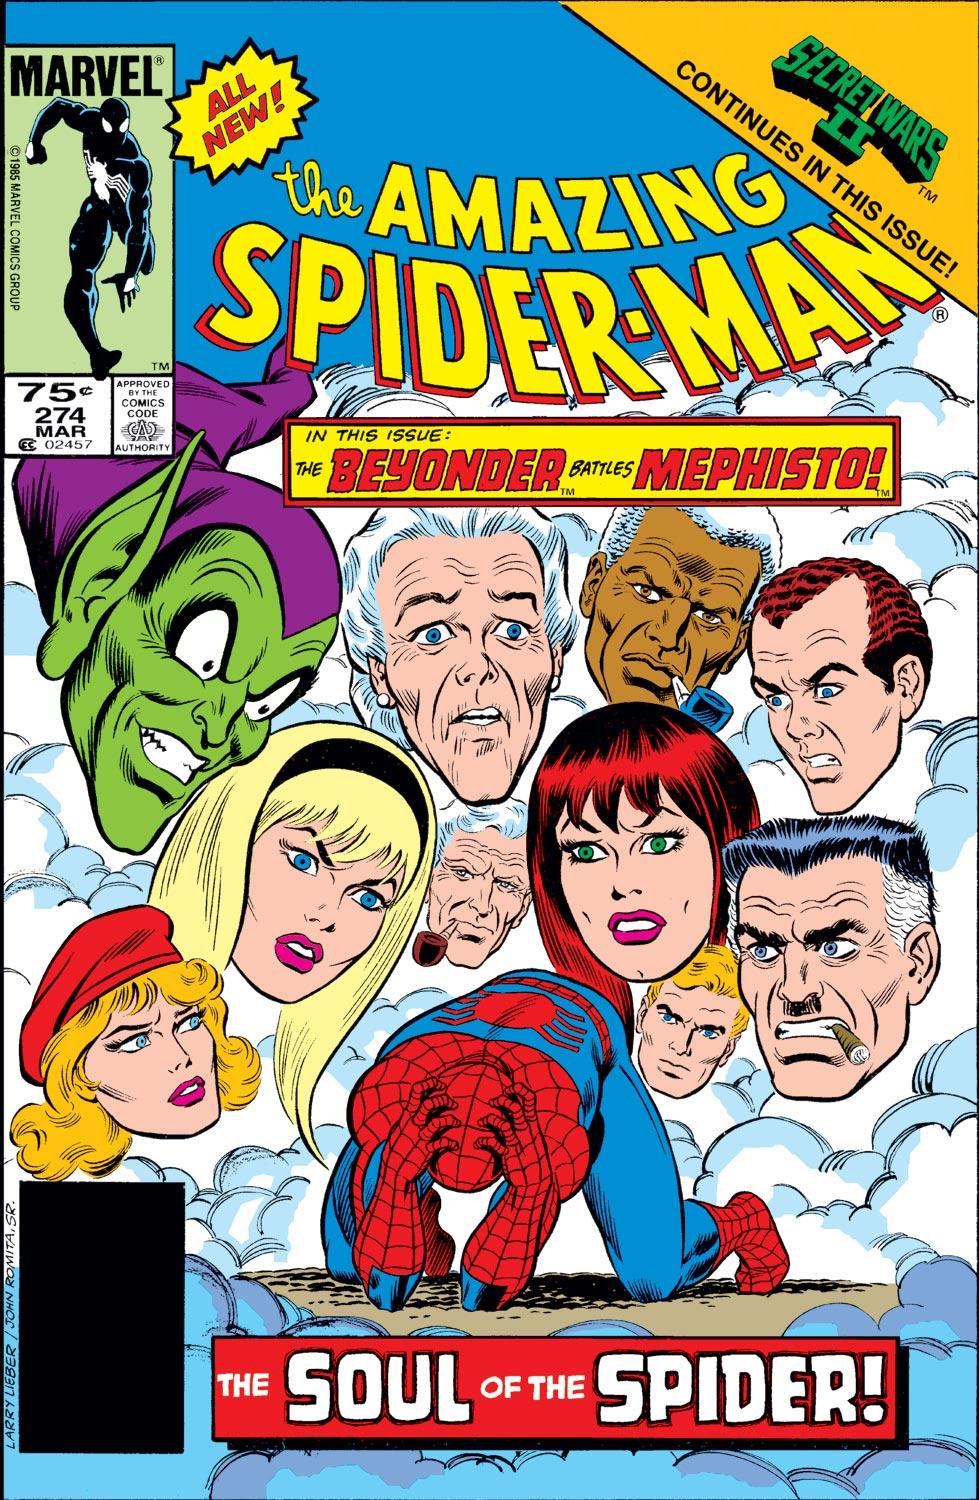 The Amazing Spider Man 1963 Issue 274 | Read The Amazing Spider Man 1963  Issue 274 comic online in high quality. Read Full Comic online for free -  Read comics online in high quality .|viewcomiconline.com